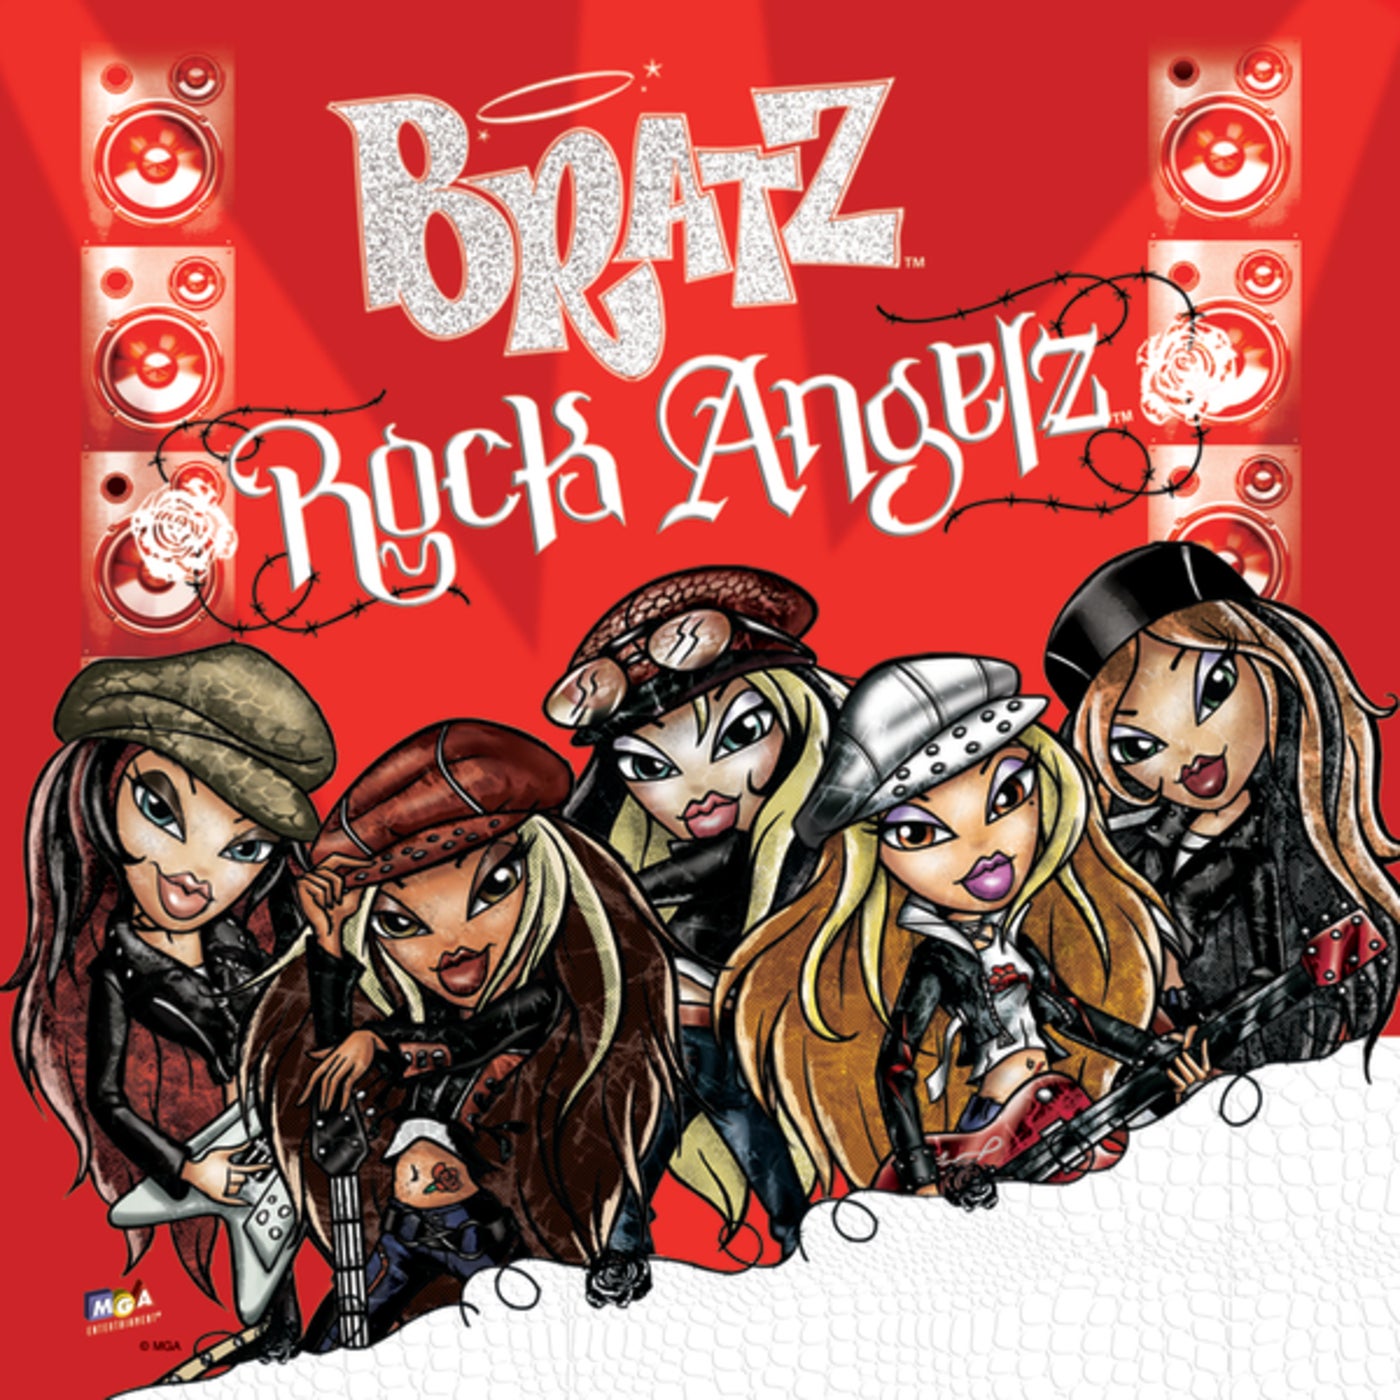 Download Get ready for some fun with great style with Bratz Doll Aesthetic  Wallpaper